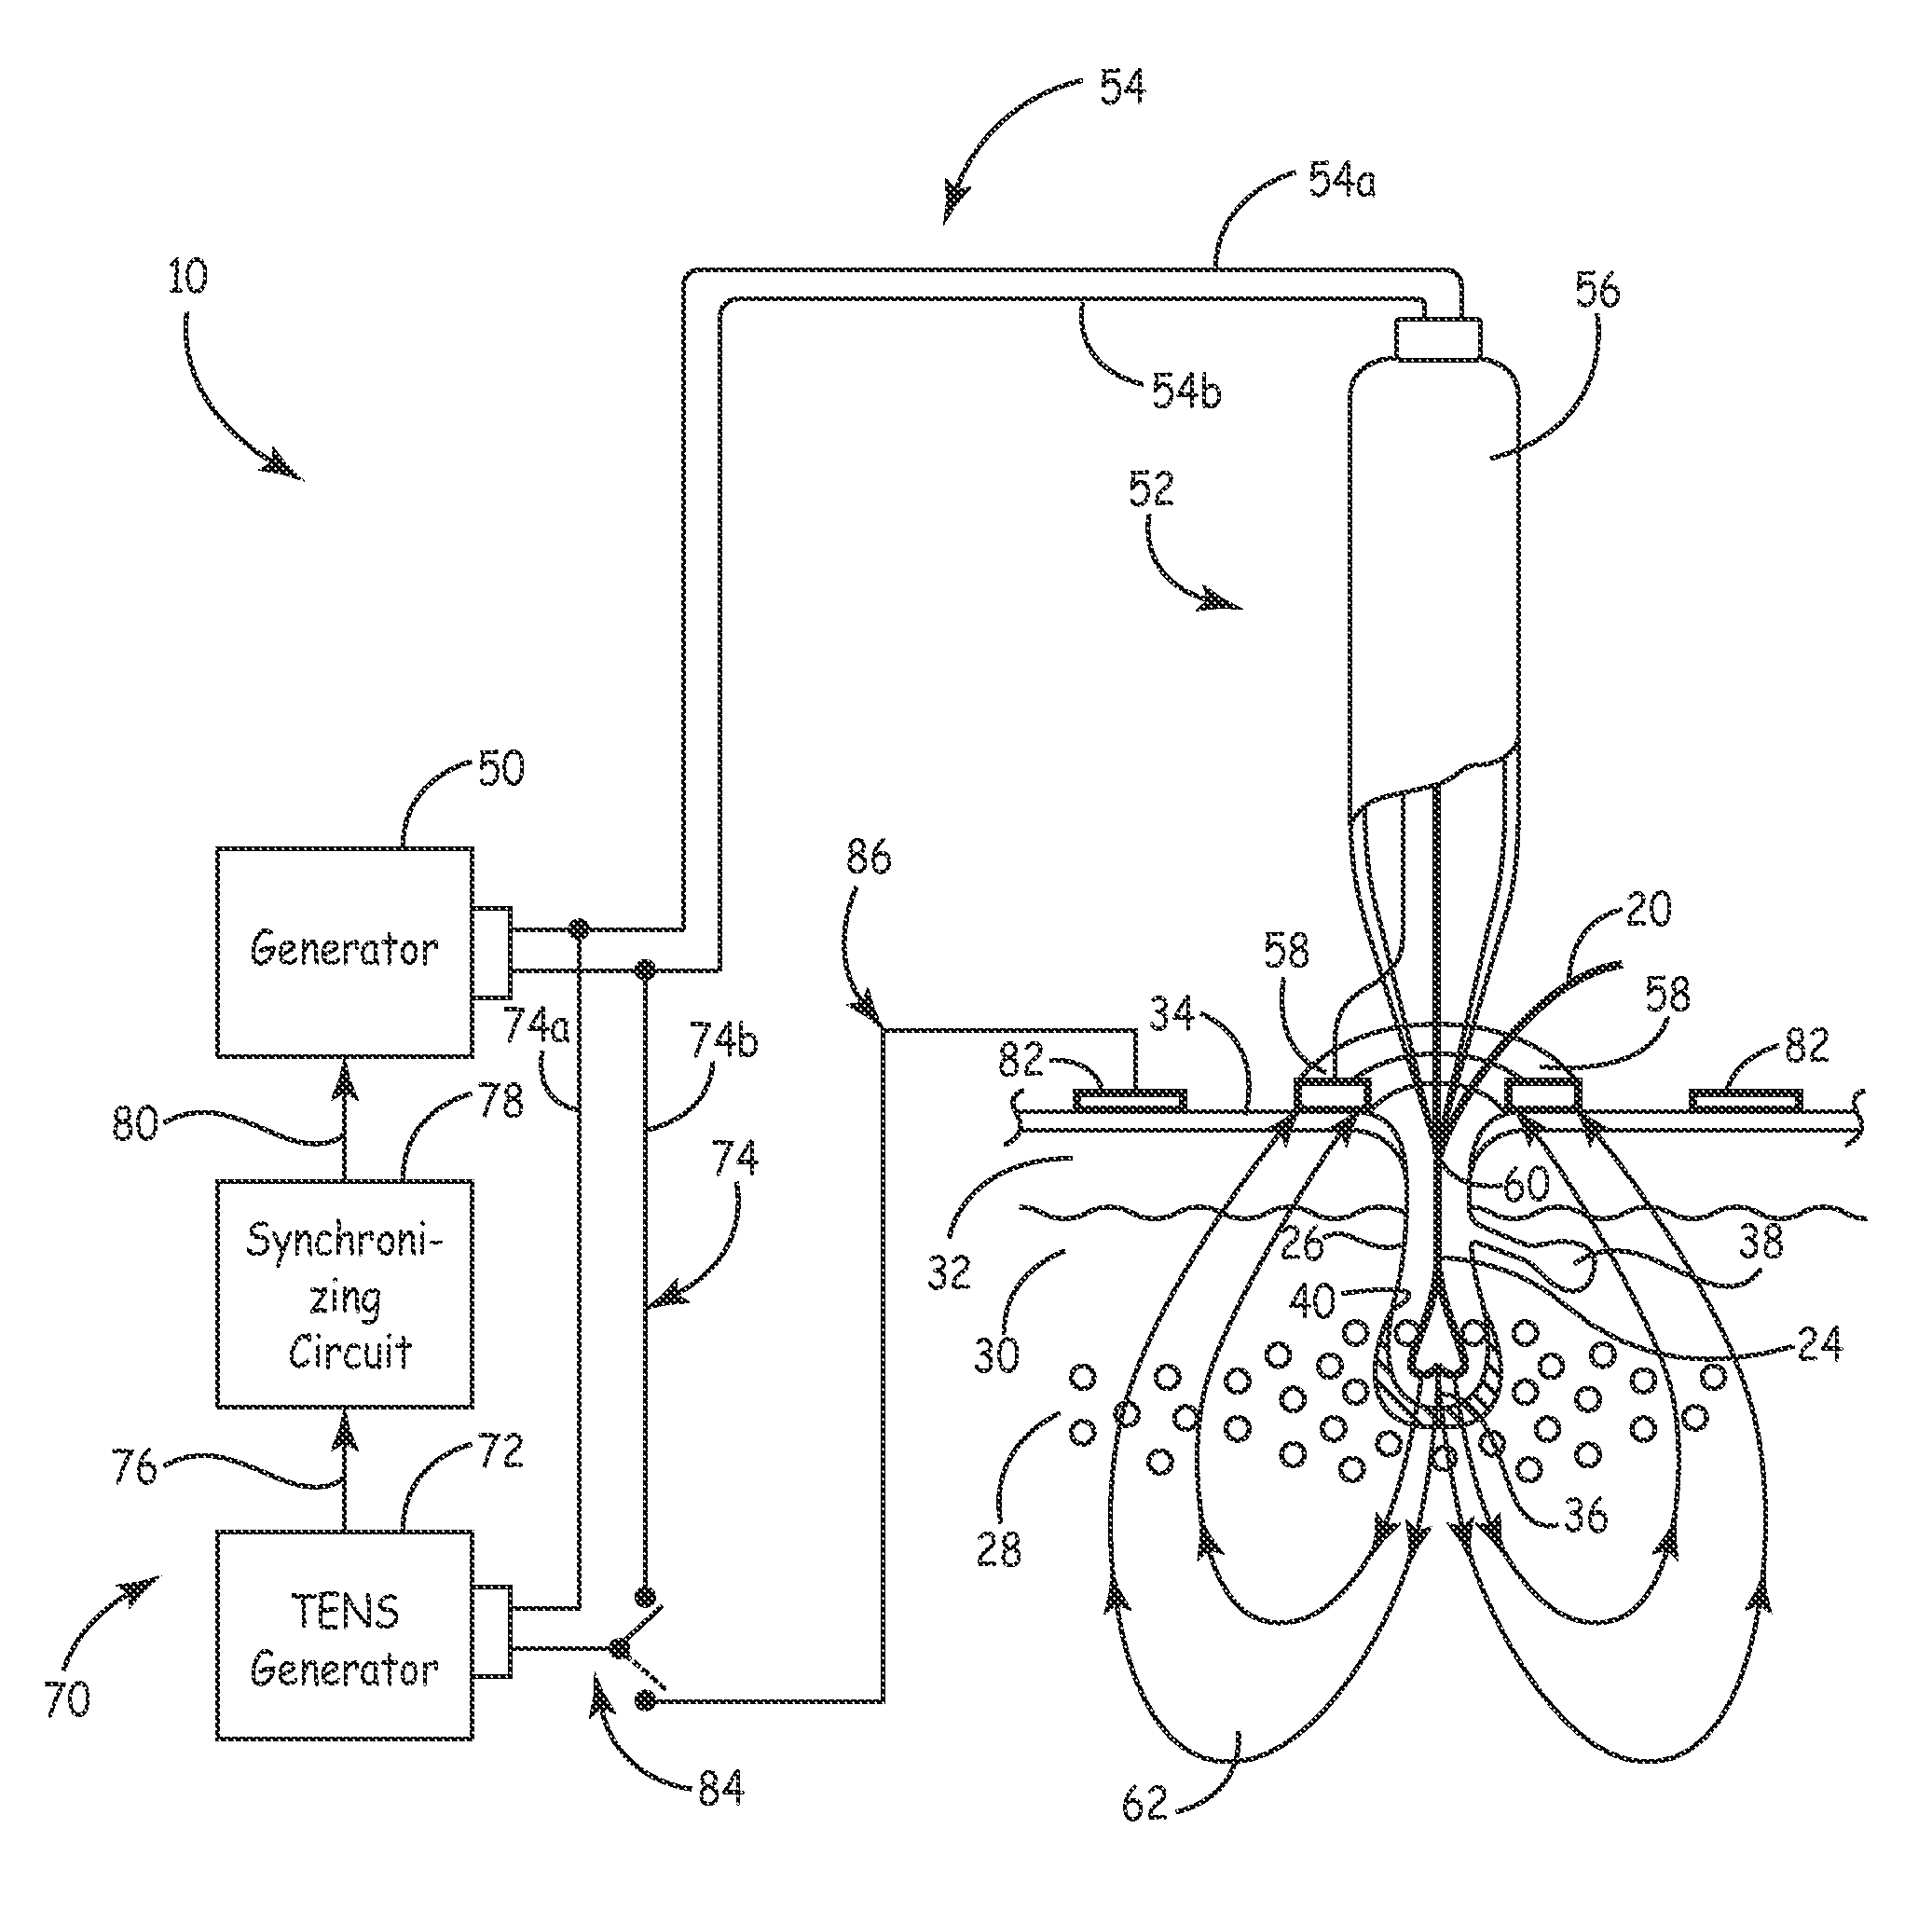 Apparatus and method for hair removal by electroporation